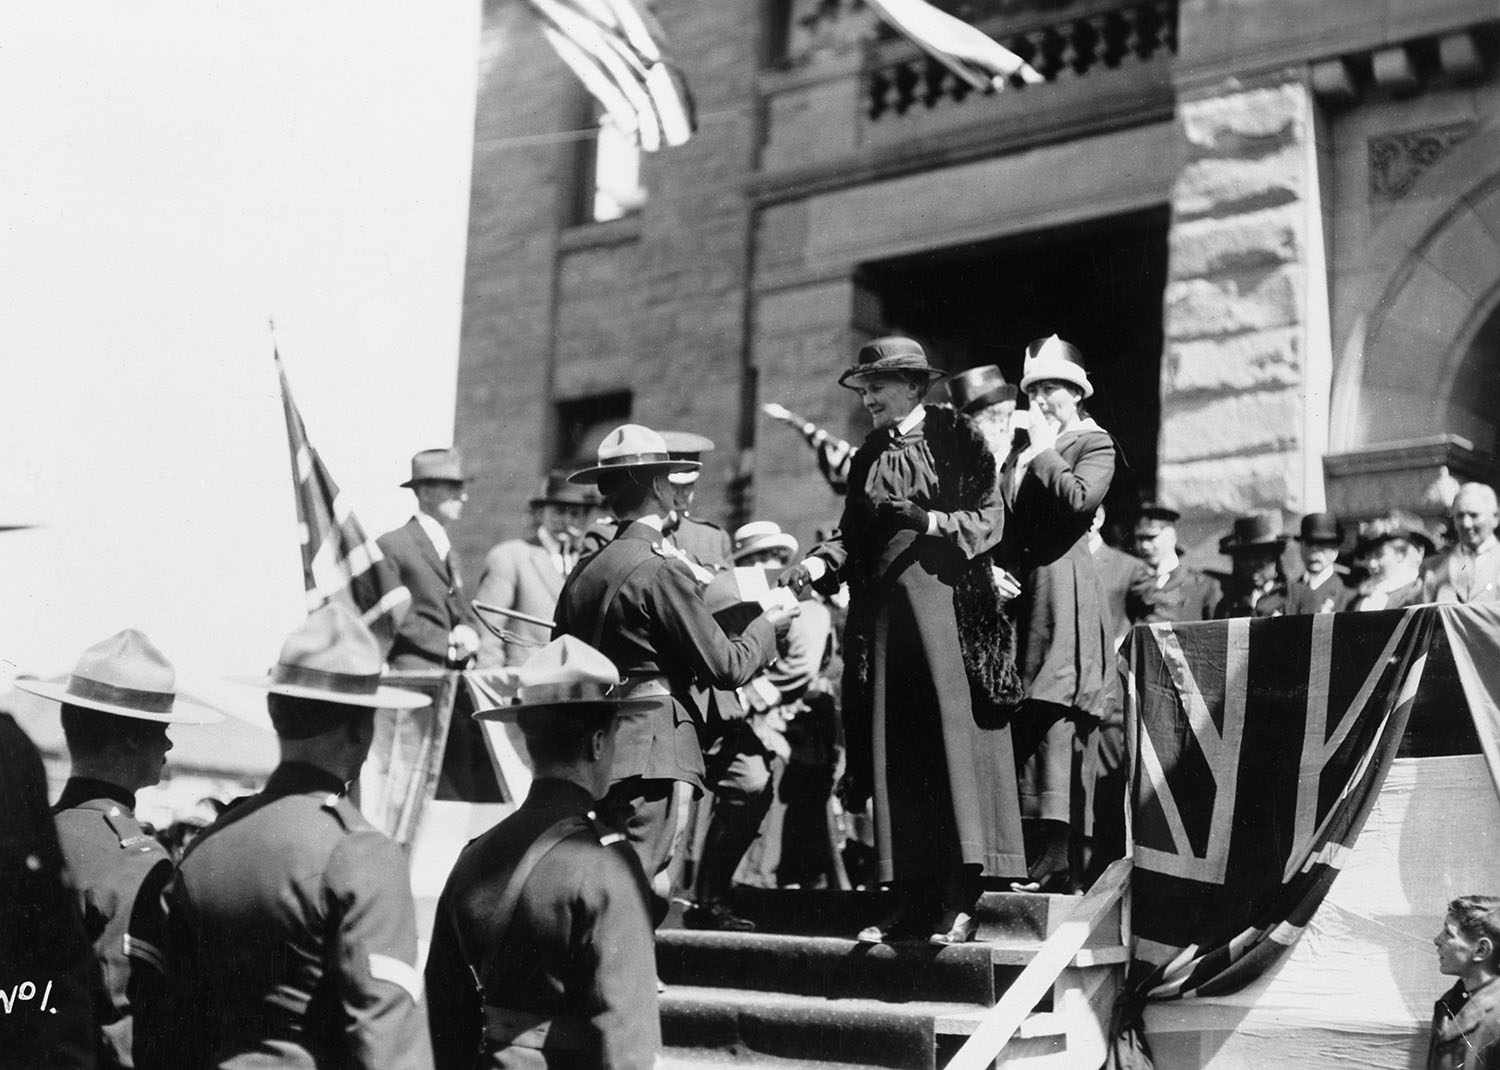 Mary Macleod with Mounted Police at an event at City Hall (undated). 